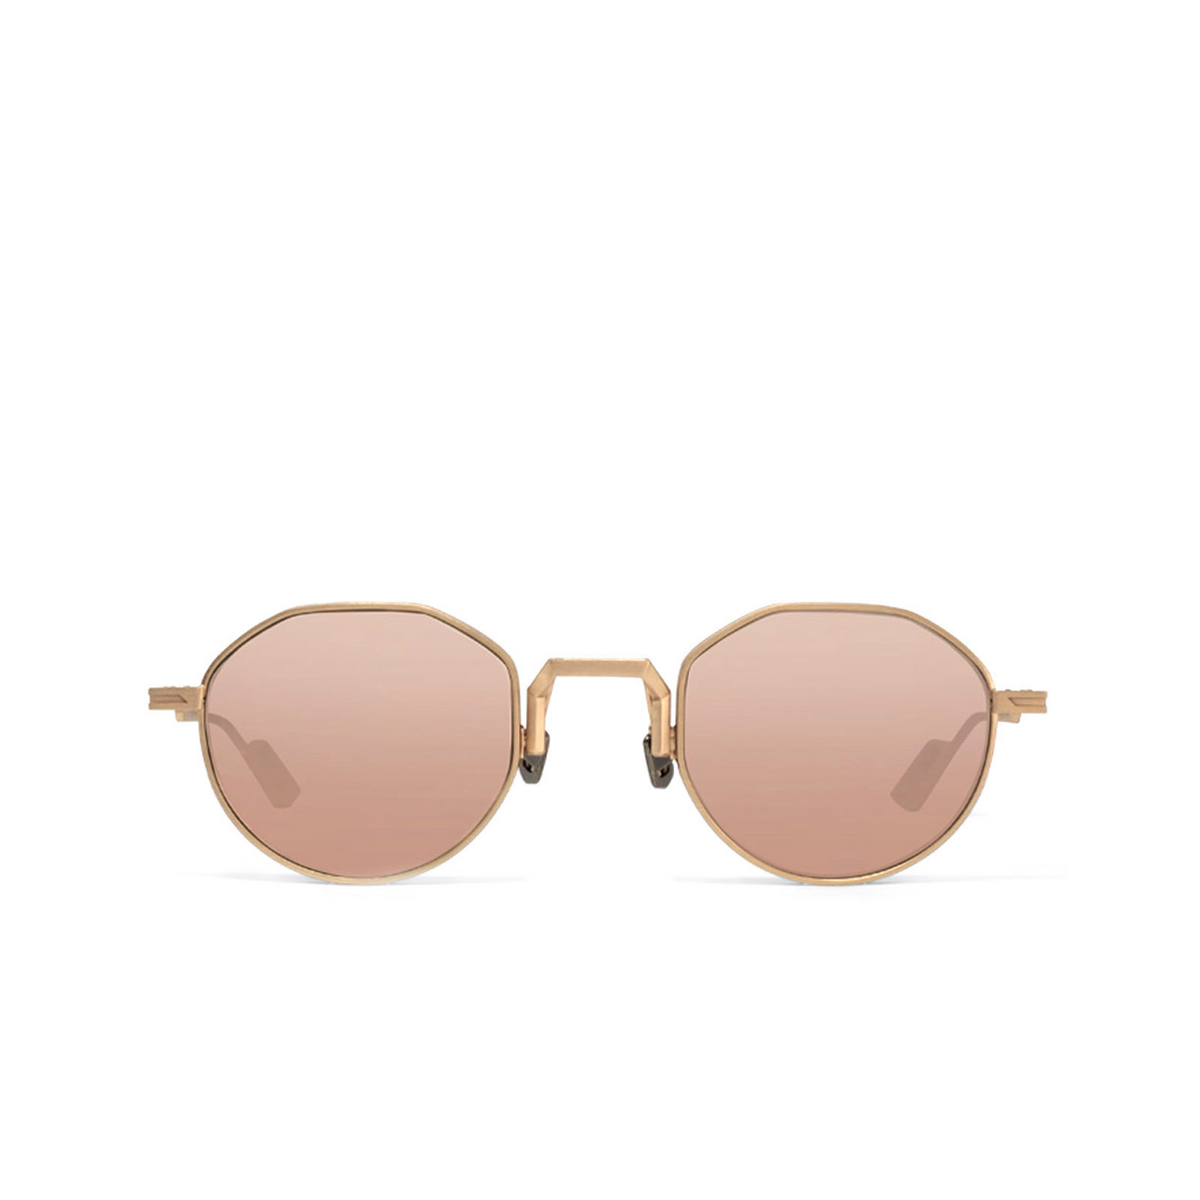 Movitra BRUNO Sunglasses ROSE GOLD MIR.RG Rose Gold - front view